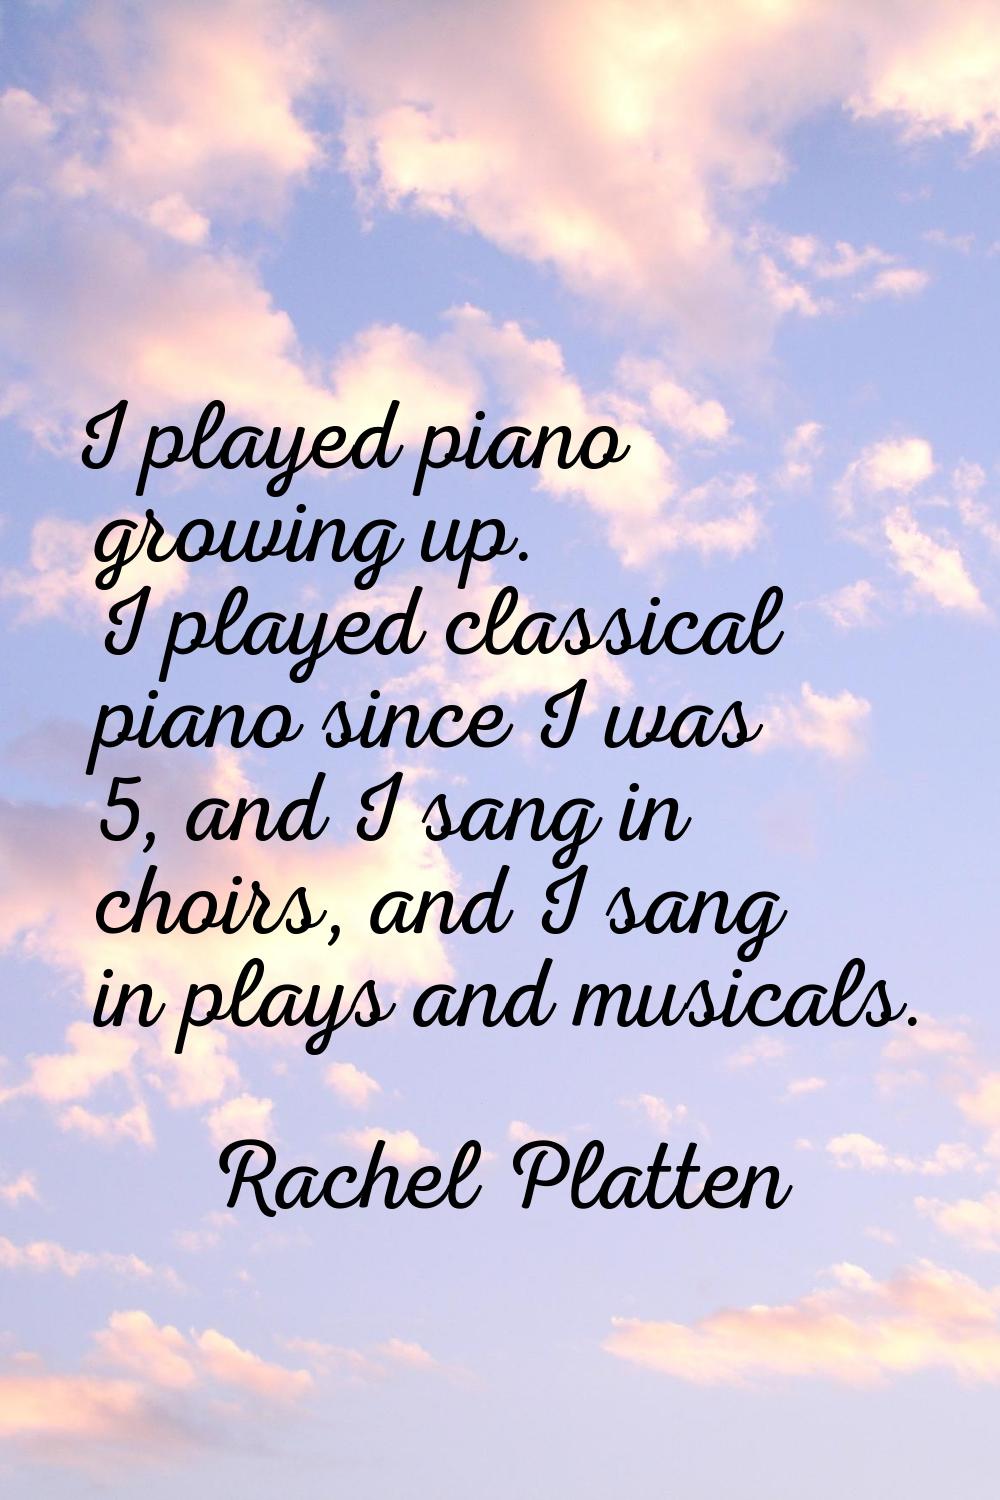 I played piano growing up. I played classical piano since I was 5, and I sang in choirs, and I sang